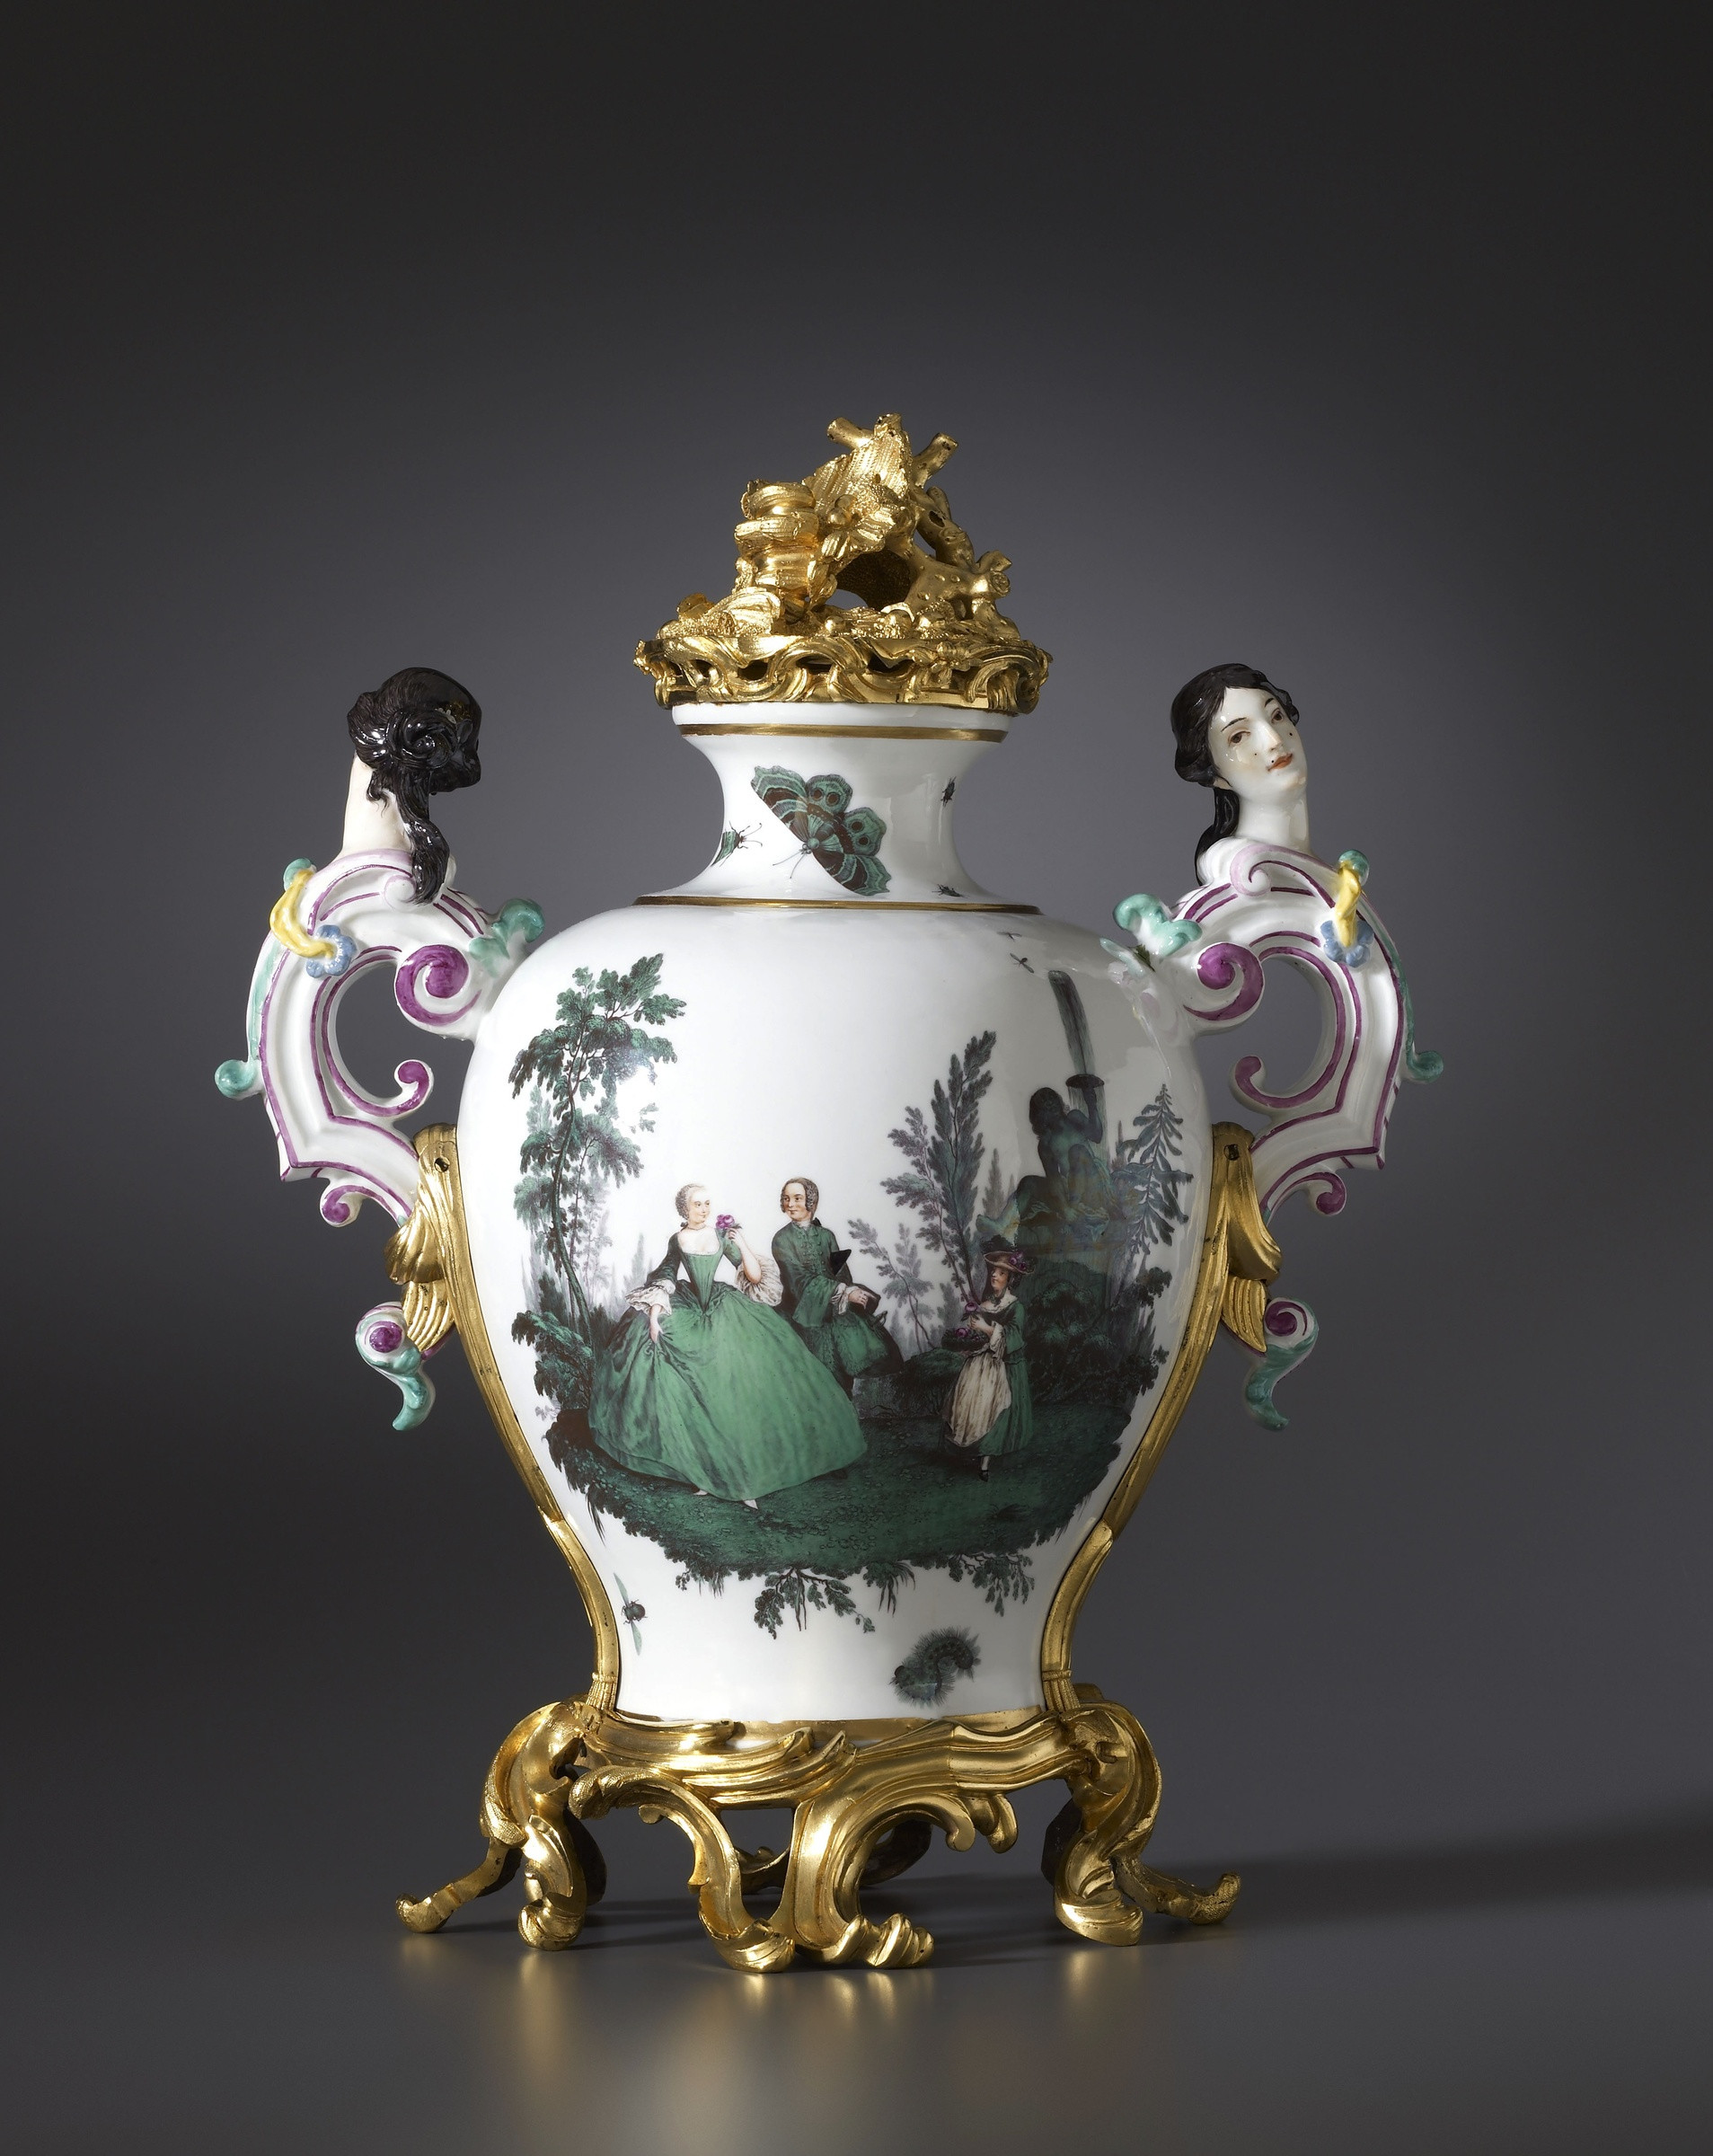 12 Fabulous Head Vases for Sale 2024 free download head vases for sale of meissen a louis xv vase by meissen almost certainly modelled by with a louis xv vase by meissen almost certainly modelled by johann joachim kac2a4ndler